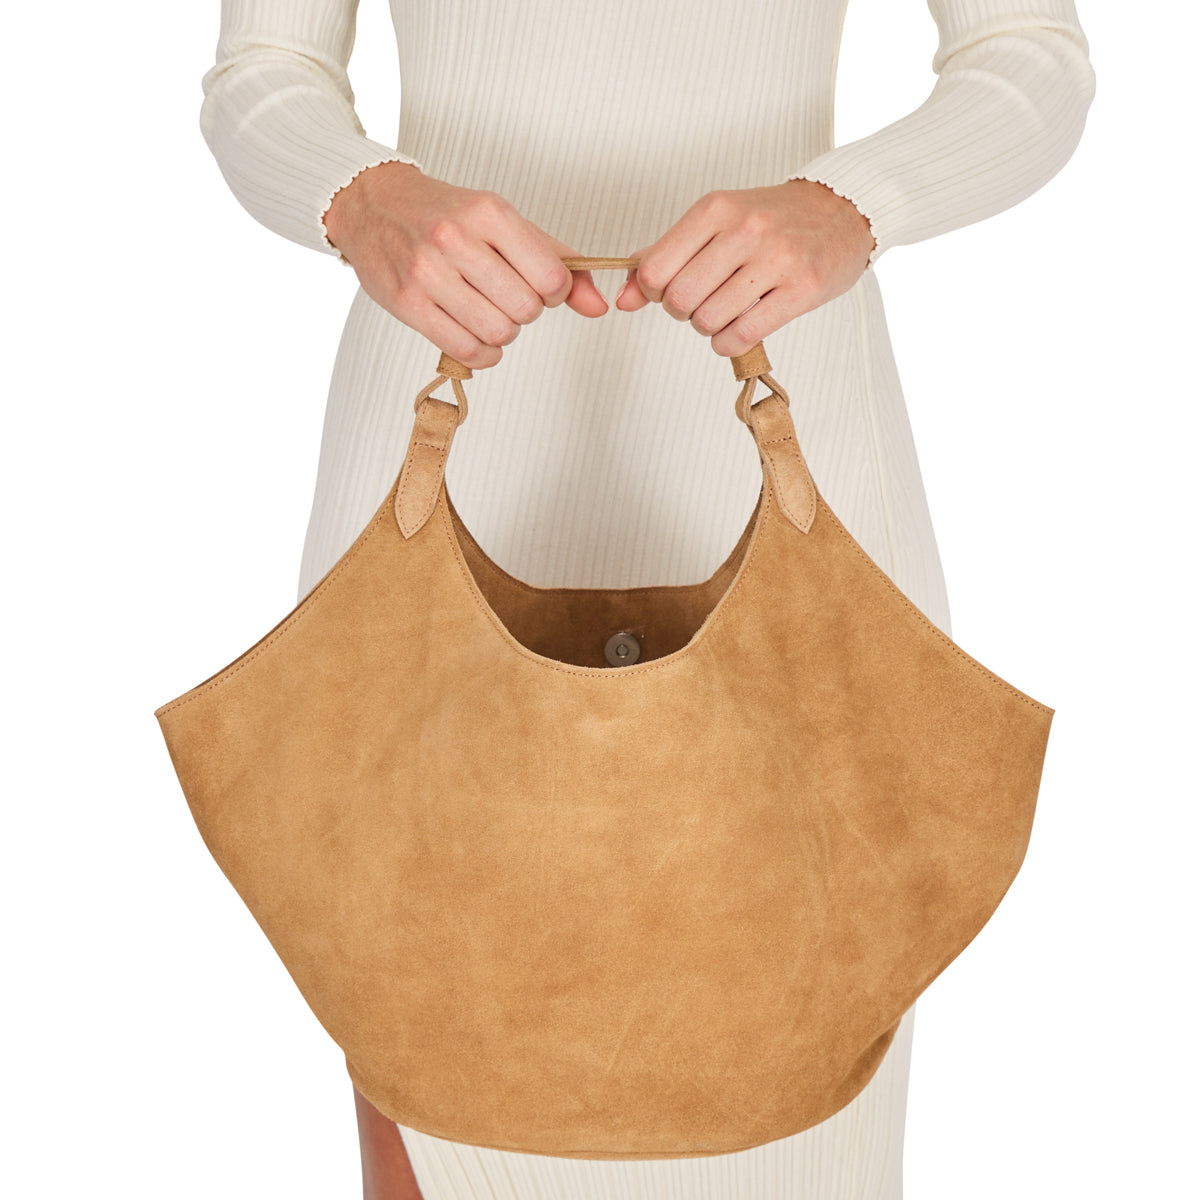 Renaissance Memories” suede bag with a brass frame | Suede bags, Bags,  Embossed leather